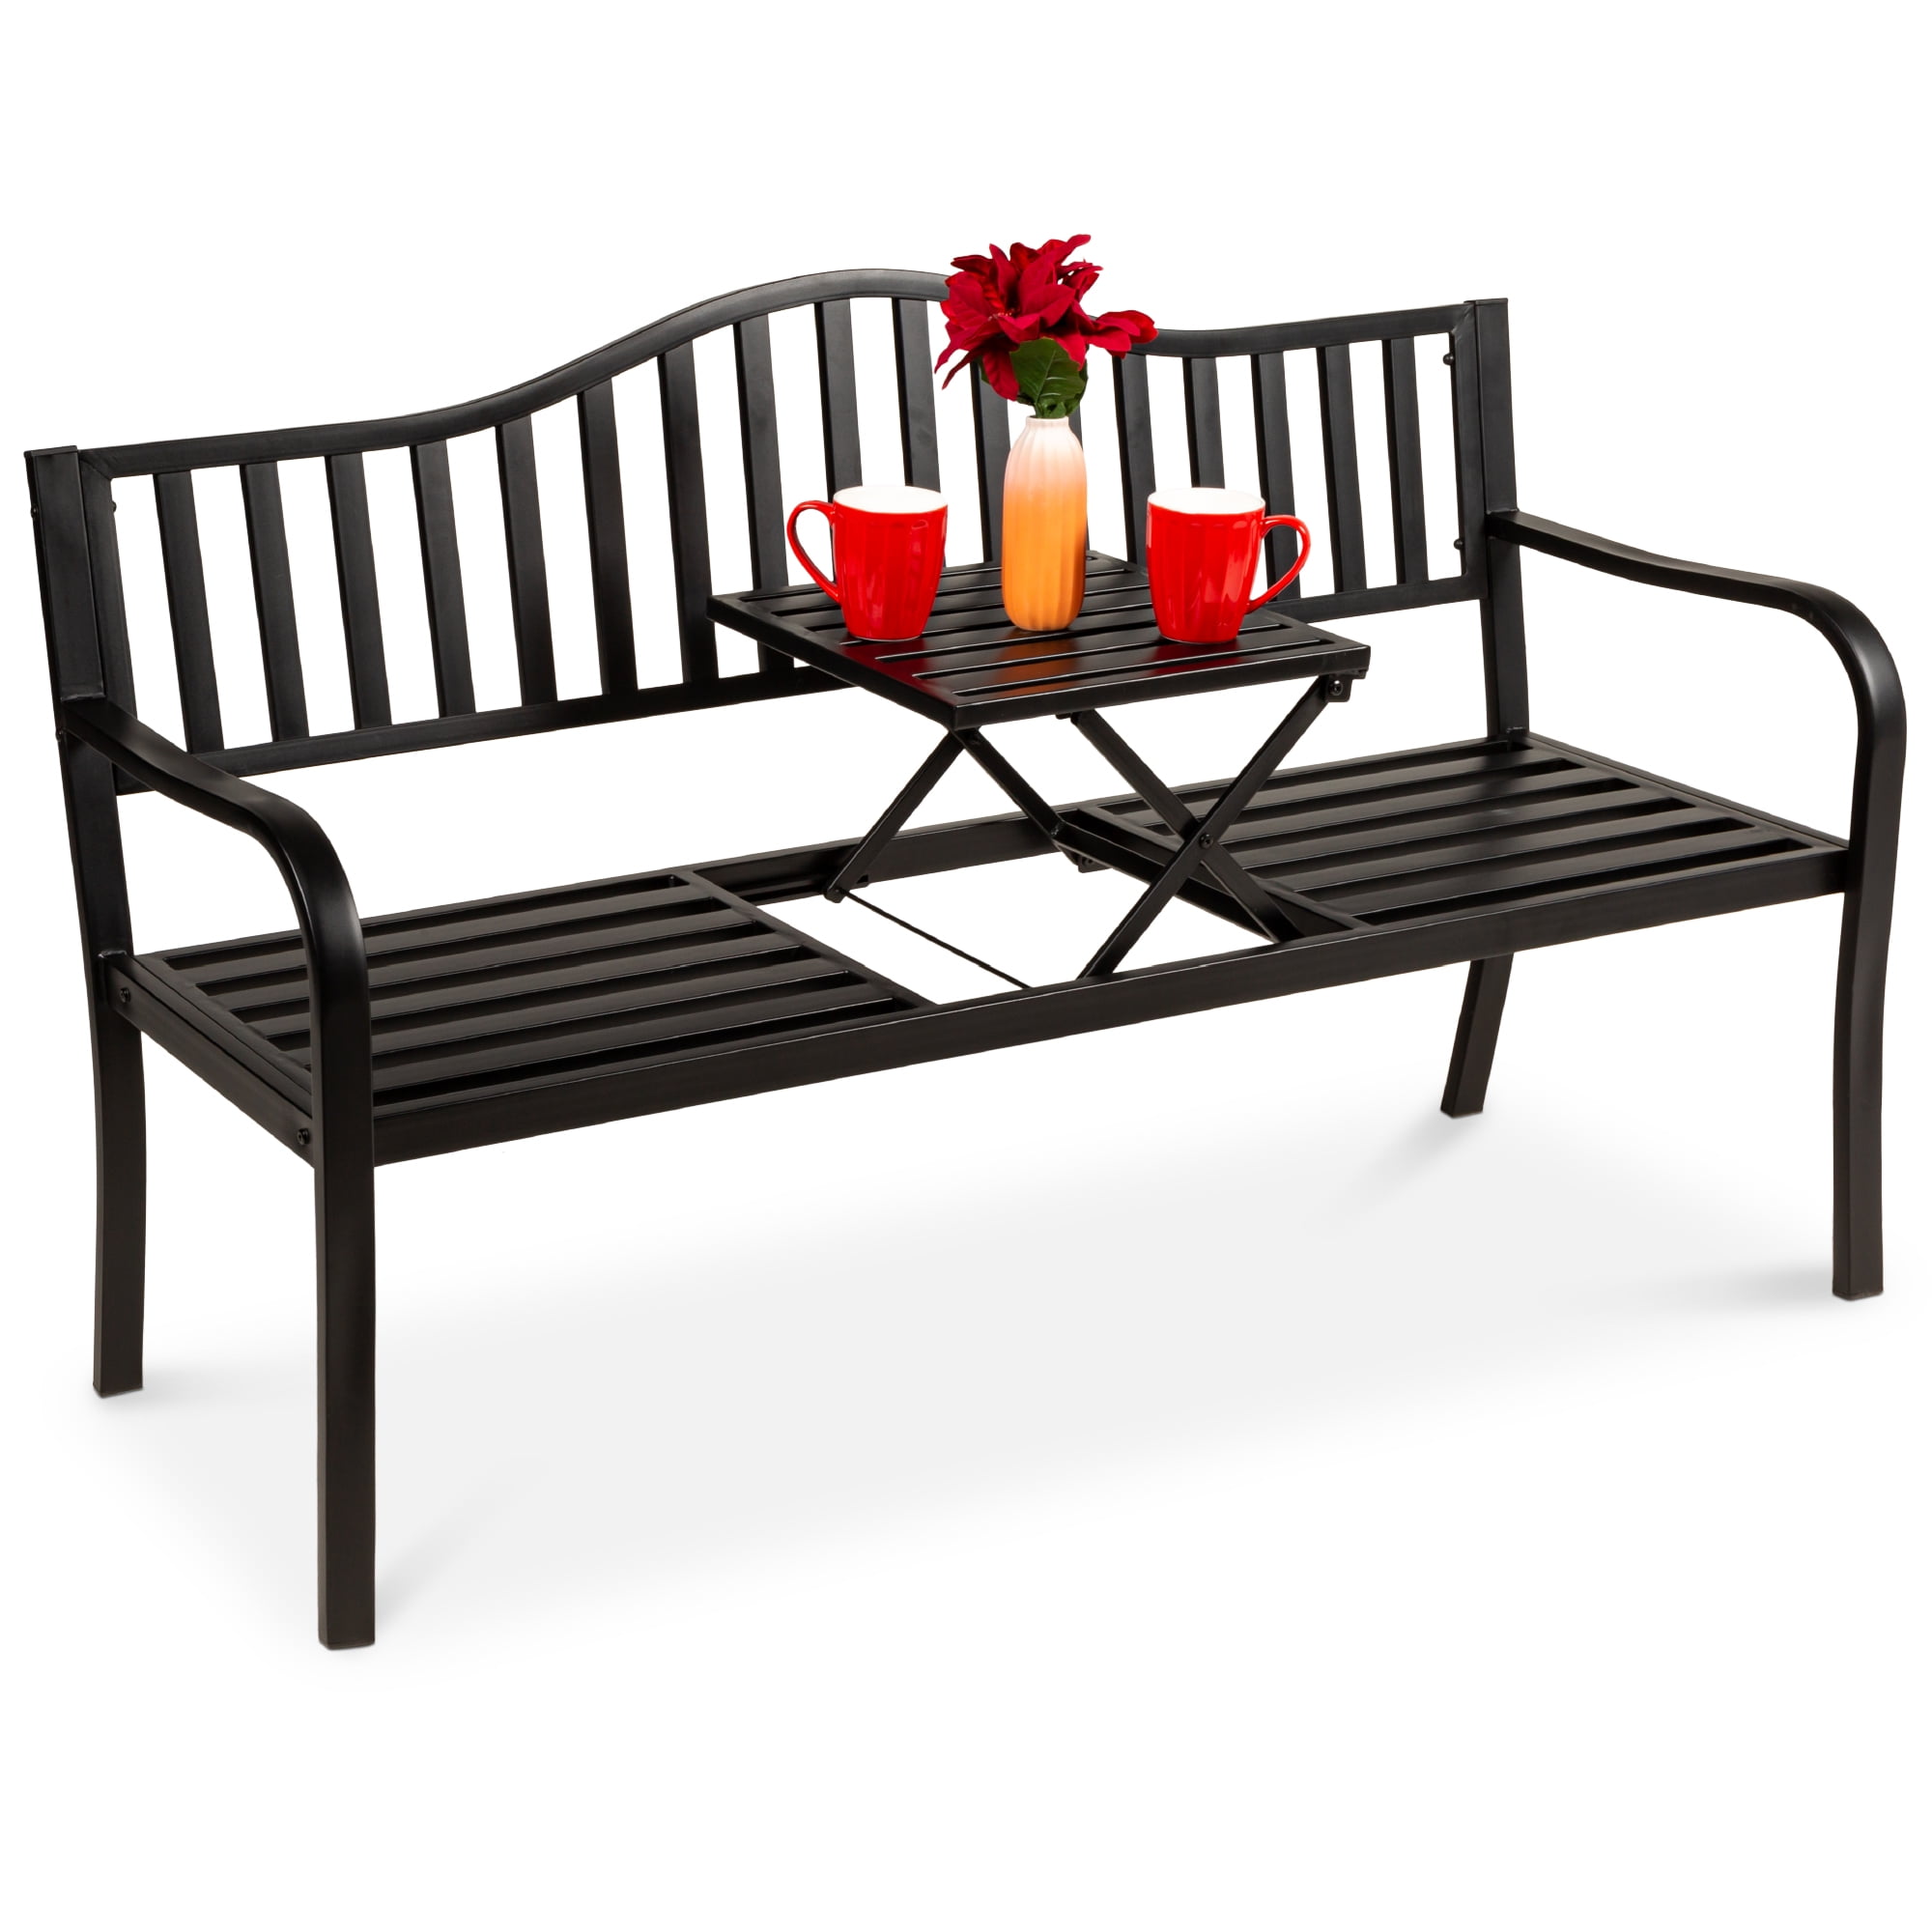 Best Choice Products Outdoor Garden Steel Patio Porch Bench with